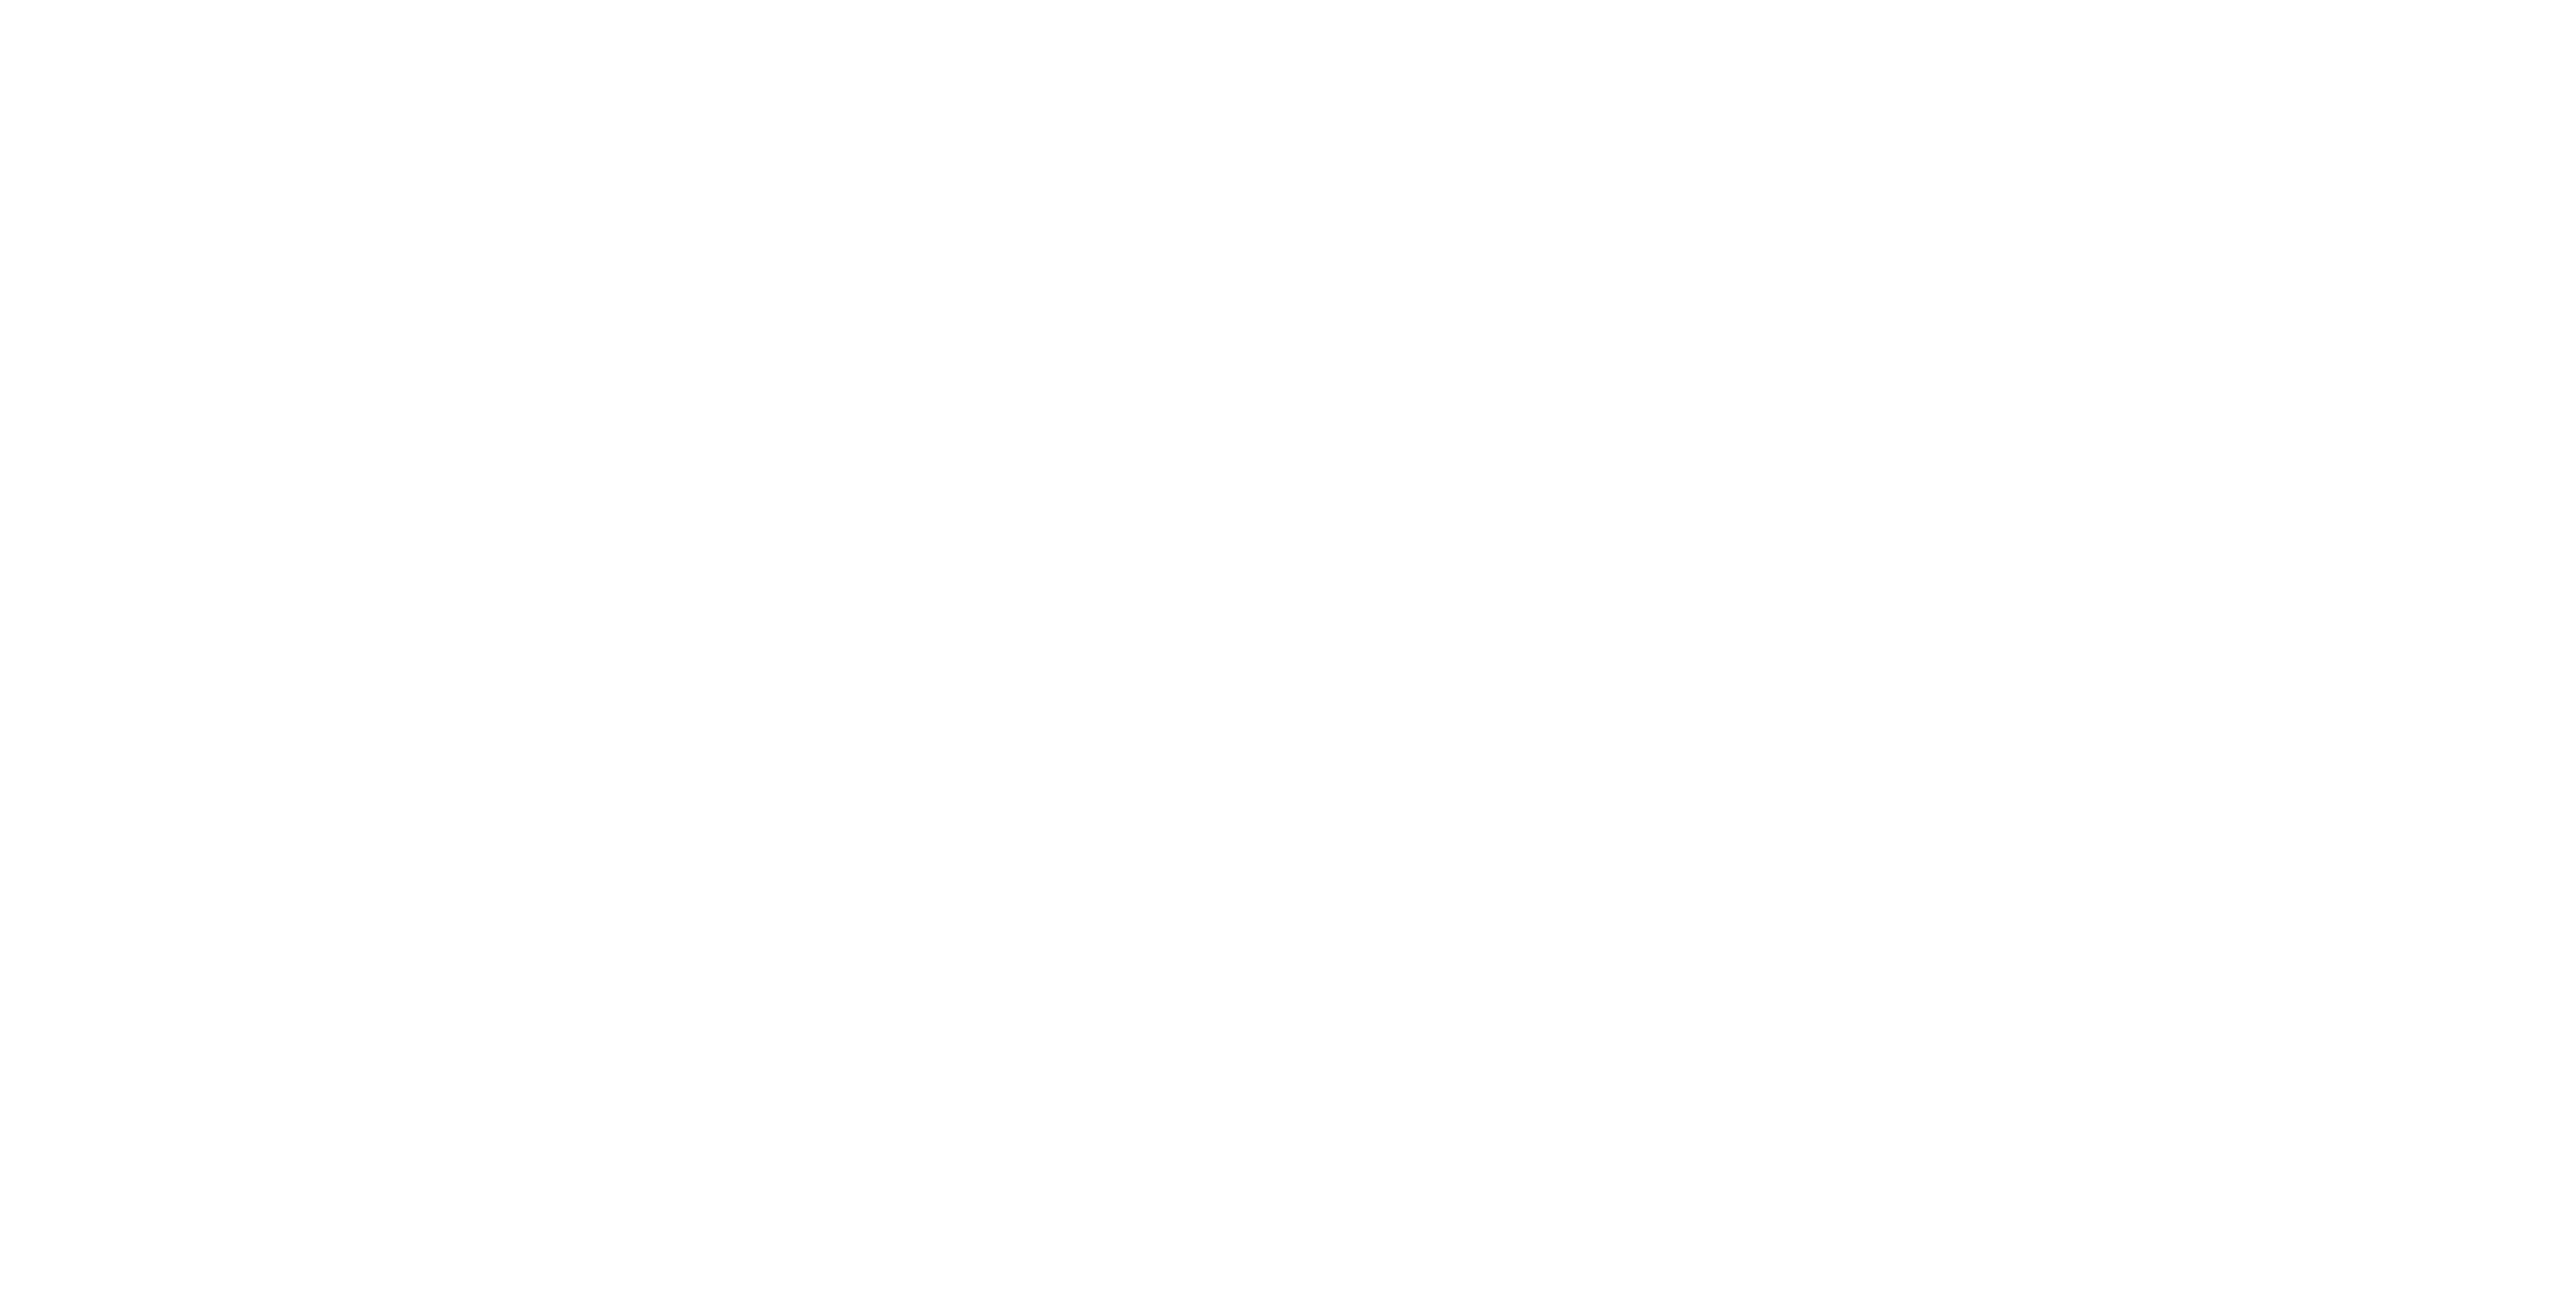 PUCCINI'S TOSCA